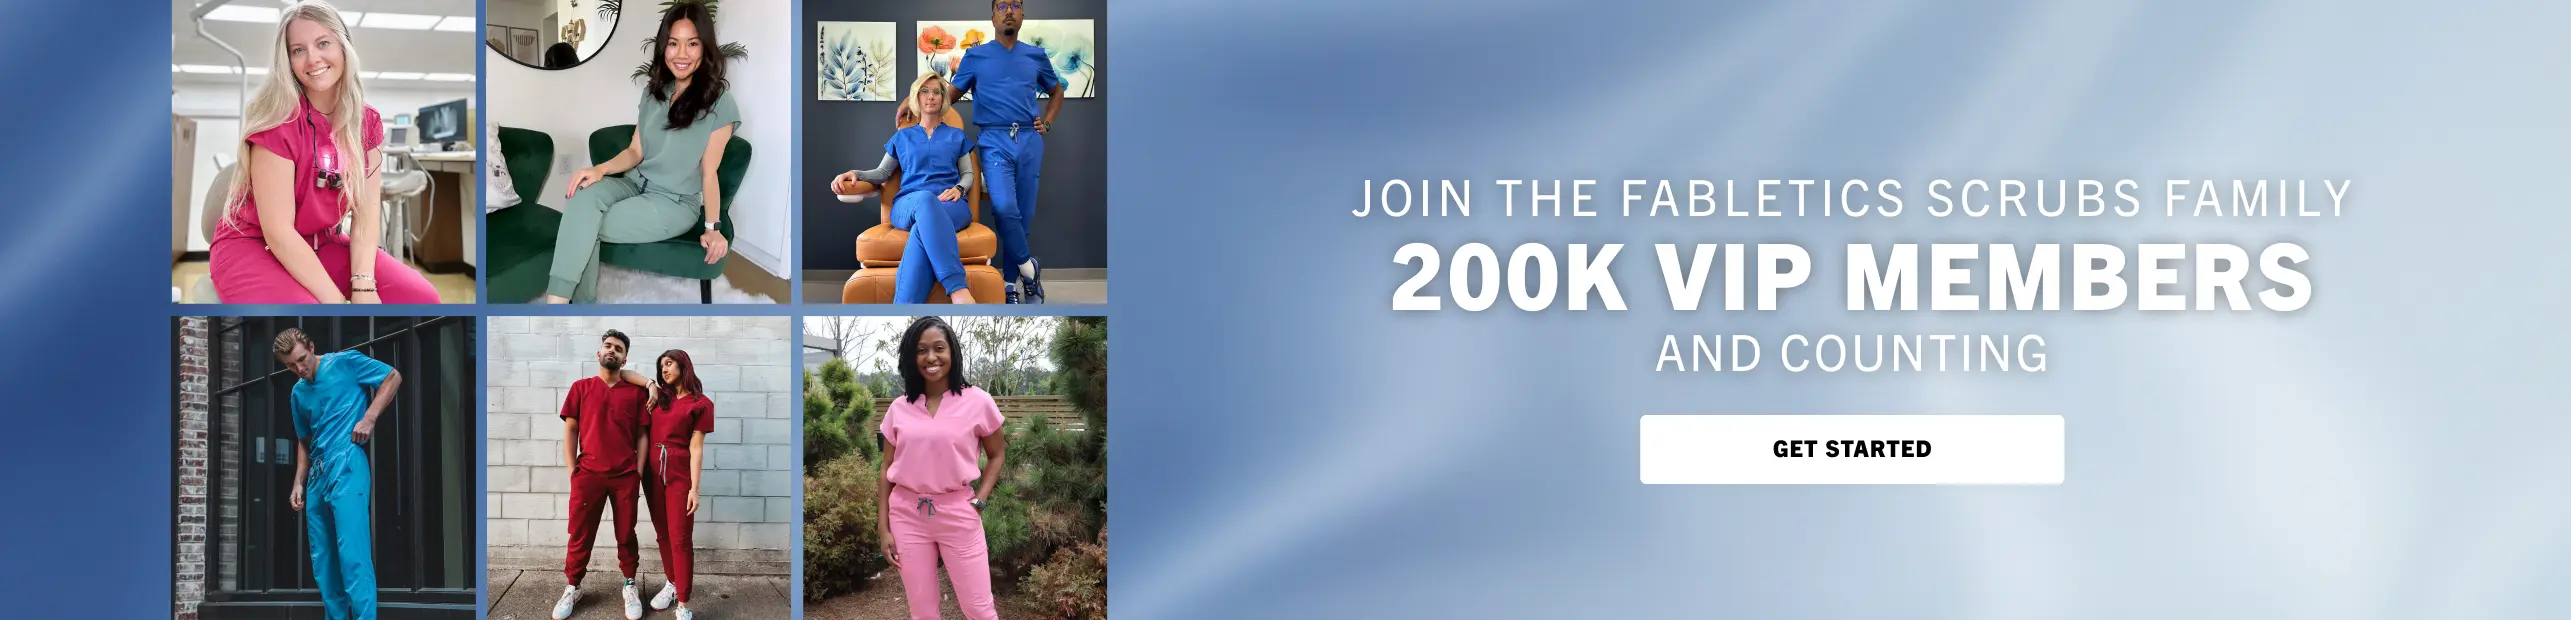 Join the Fabletics Scrubs family 67,000 VIP members and counting. Click to get started.